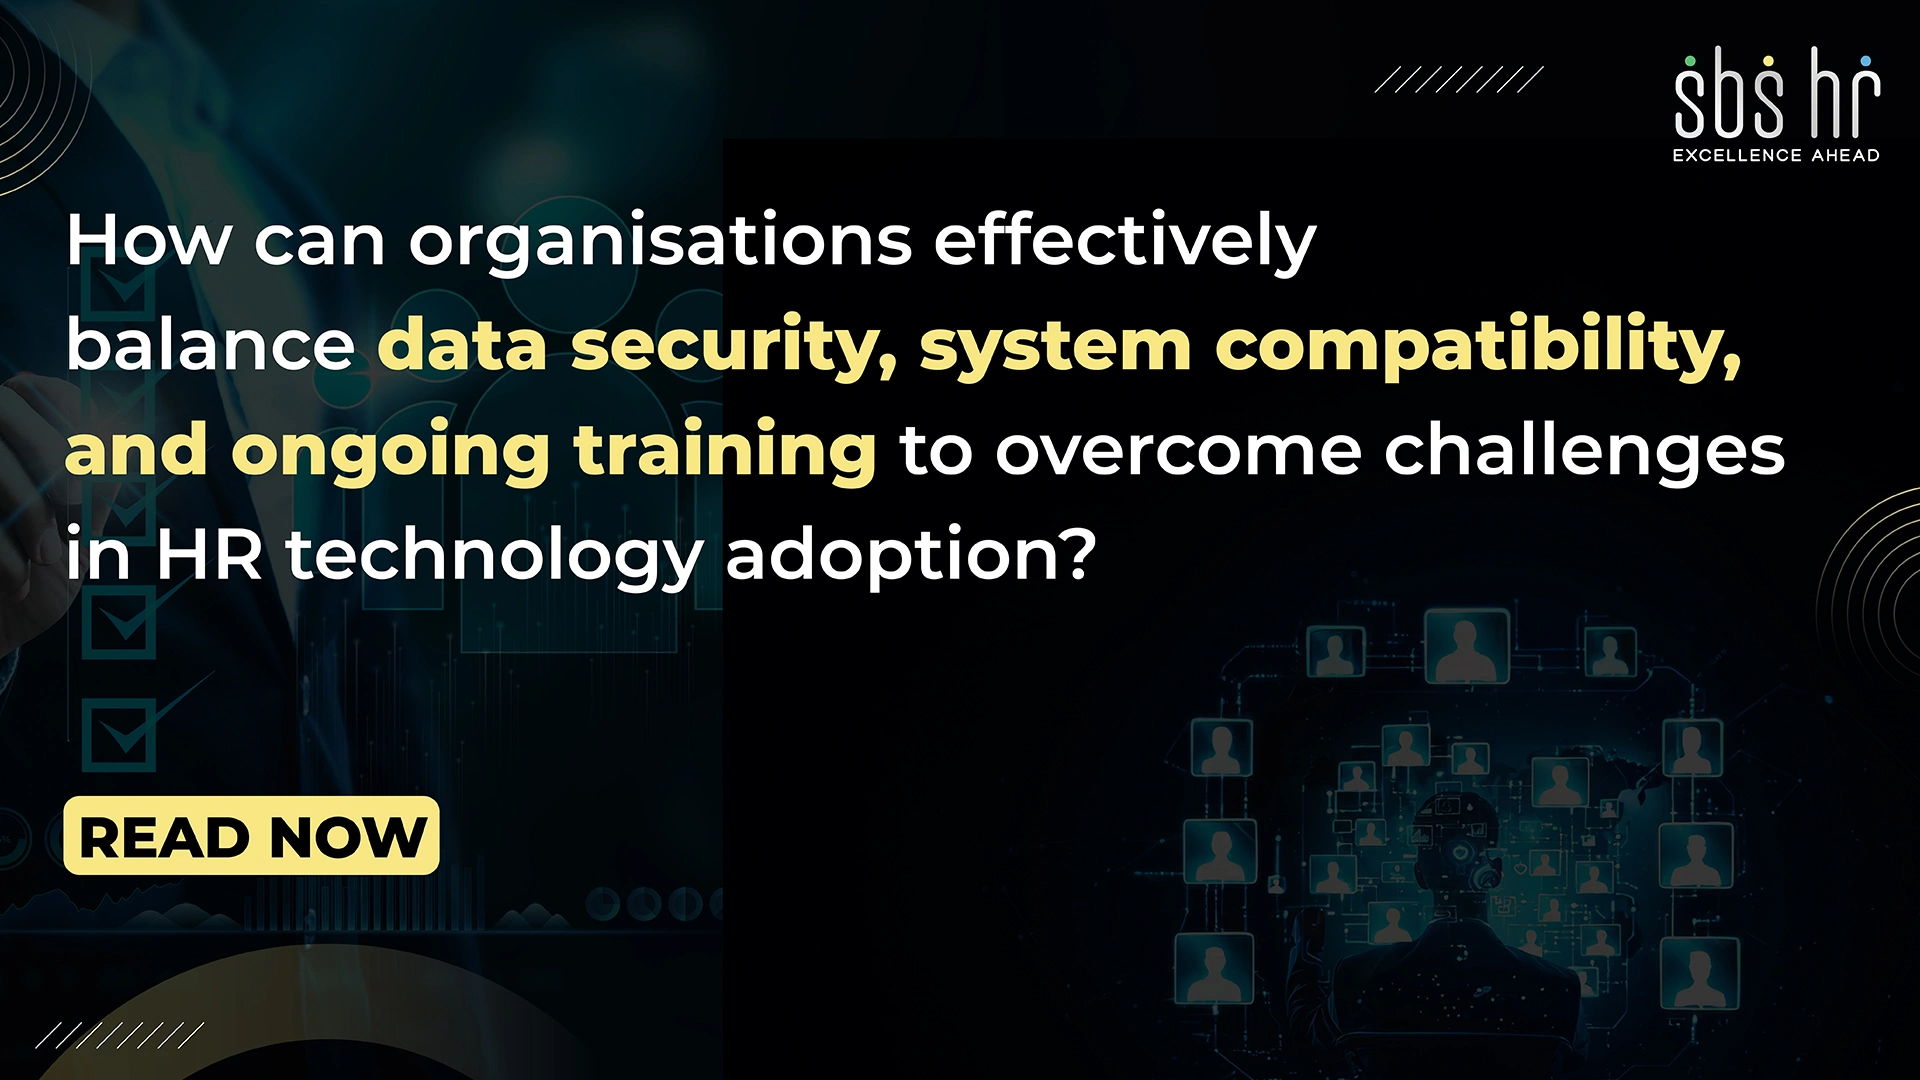 How can organisations effectively balance data security, system compatibility, and ongoing training to overcome challenges in HR technology adoption